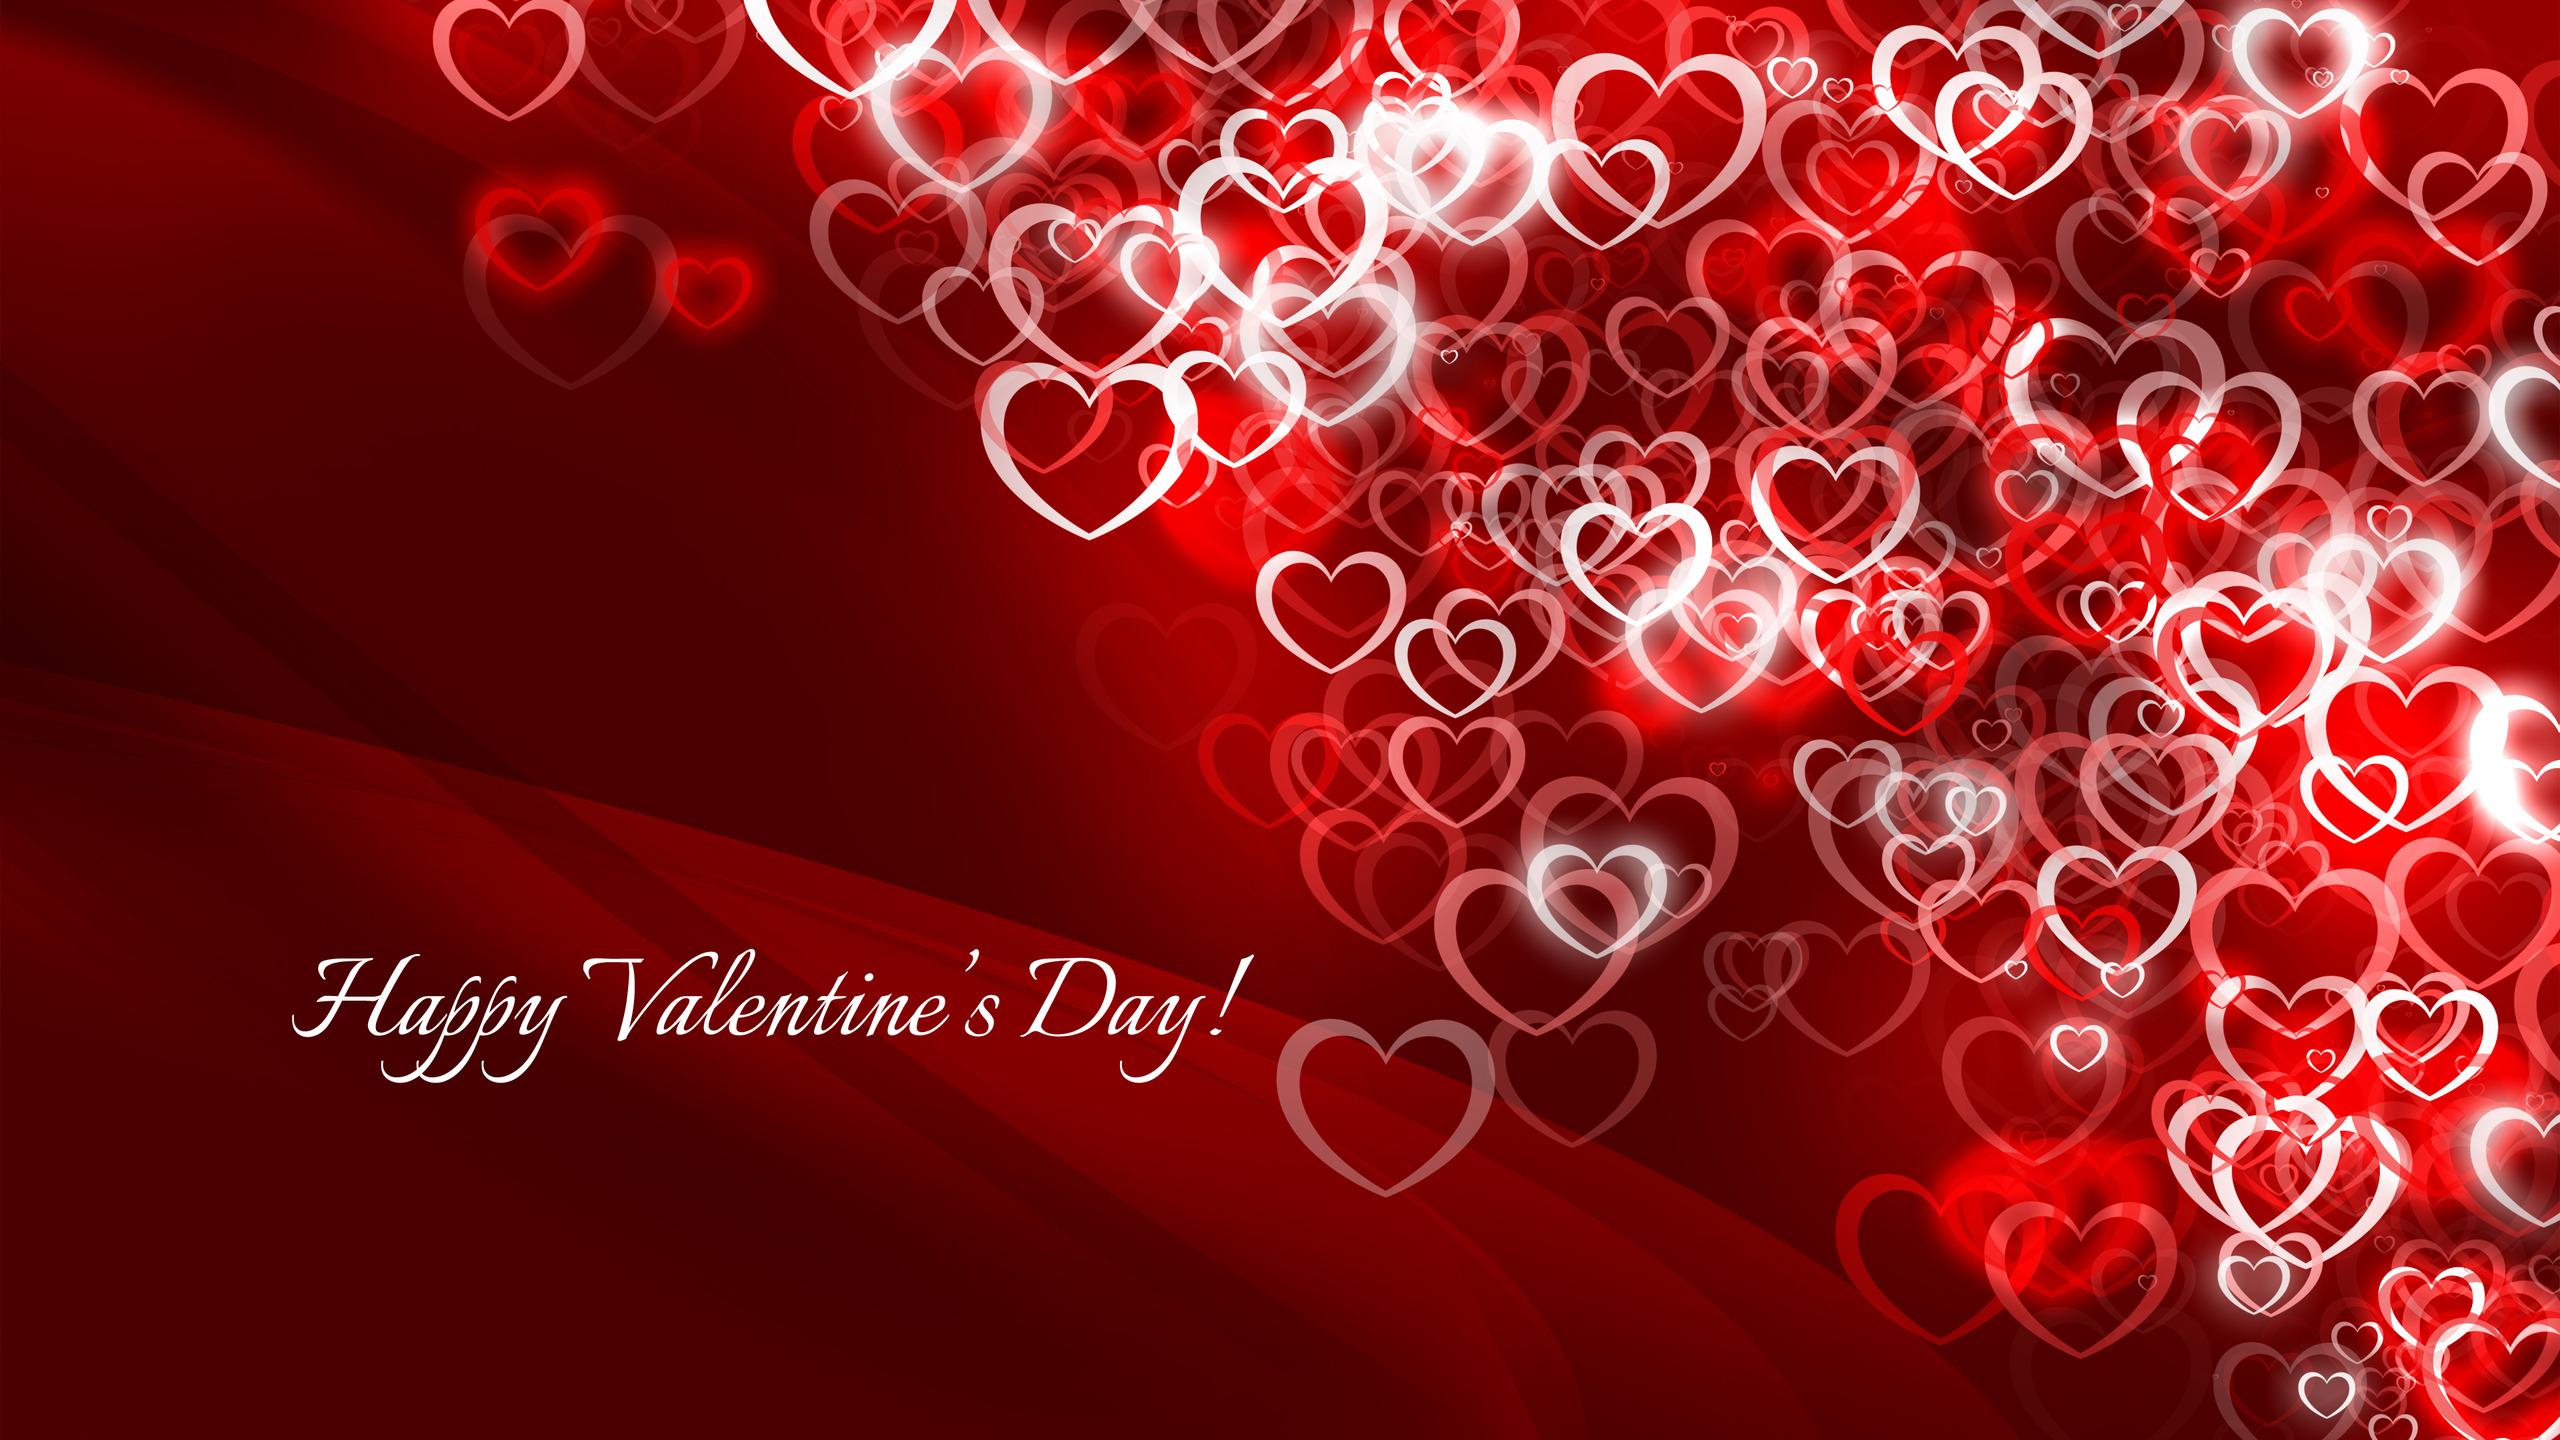 Valentines Day 2020 Hd Wallpapers Wallpaper Cave